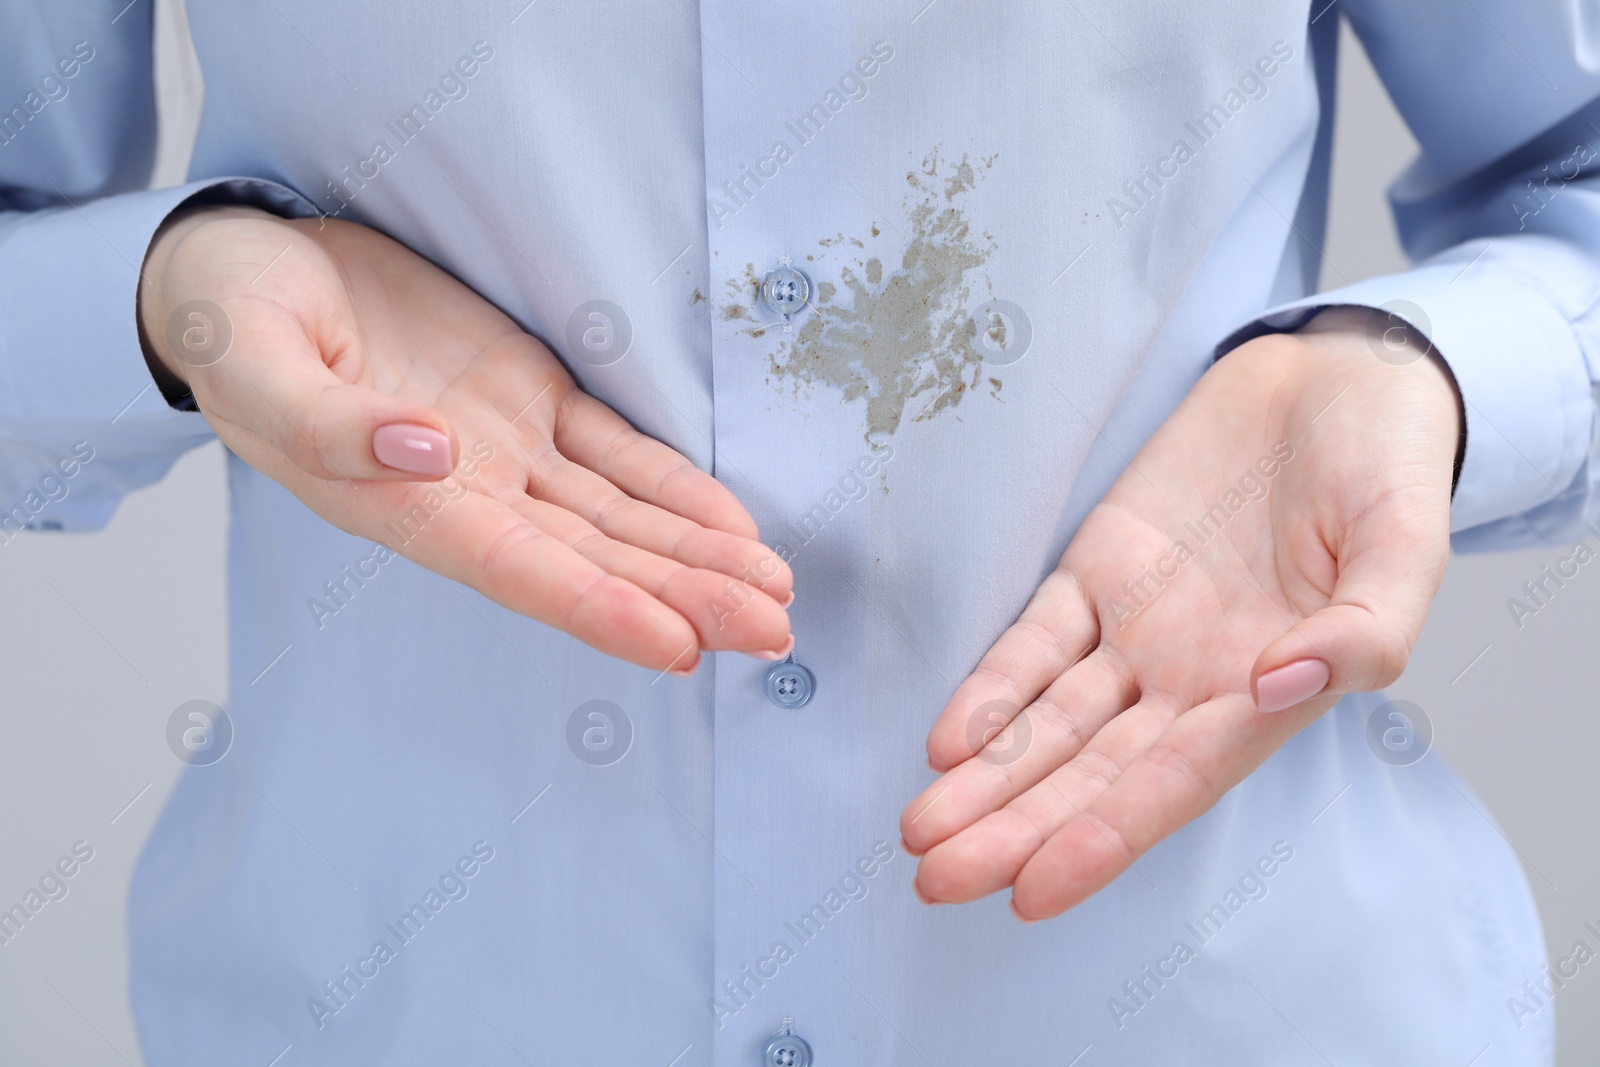 Photo of Woman showing stain on her shirt against light grey background, closeup